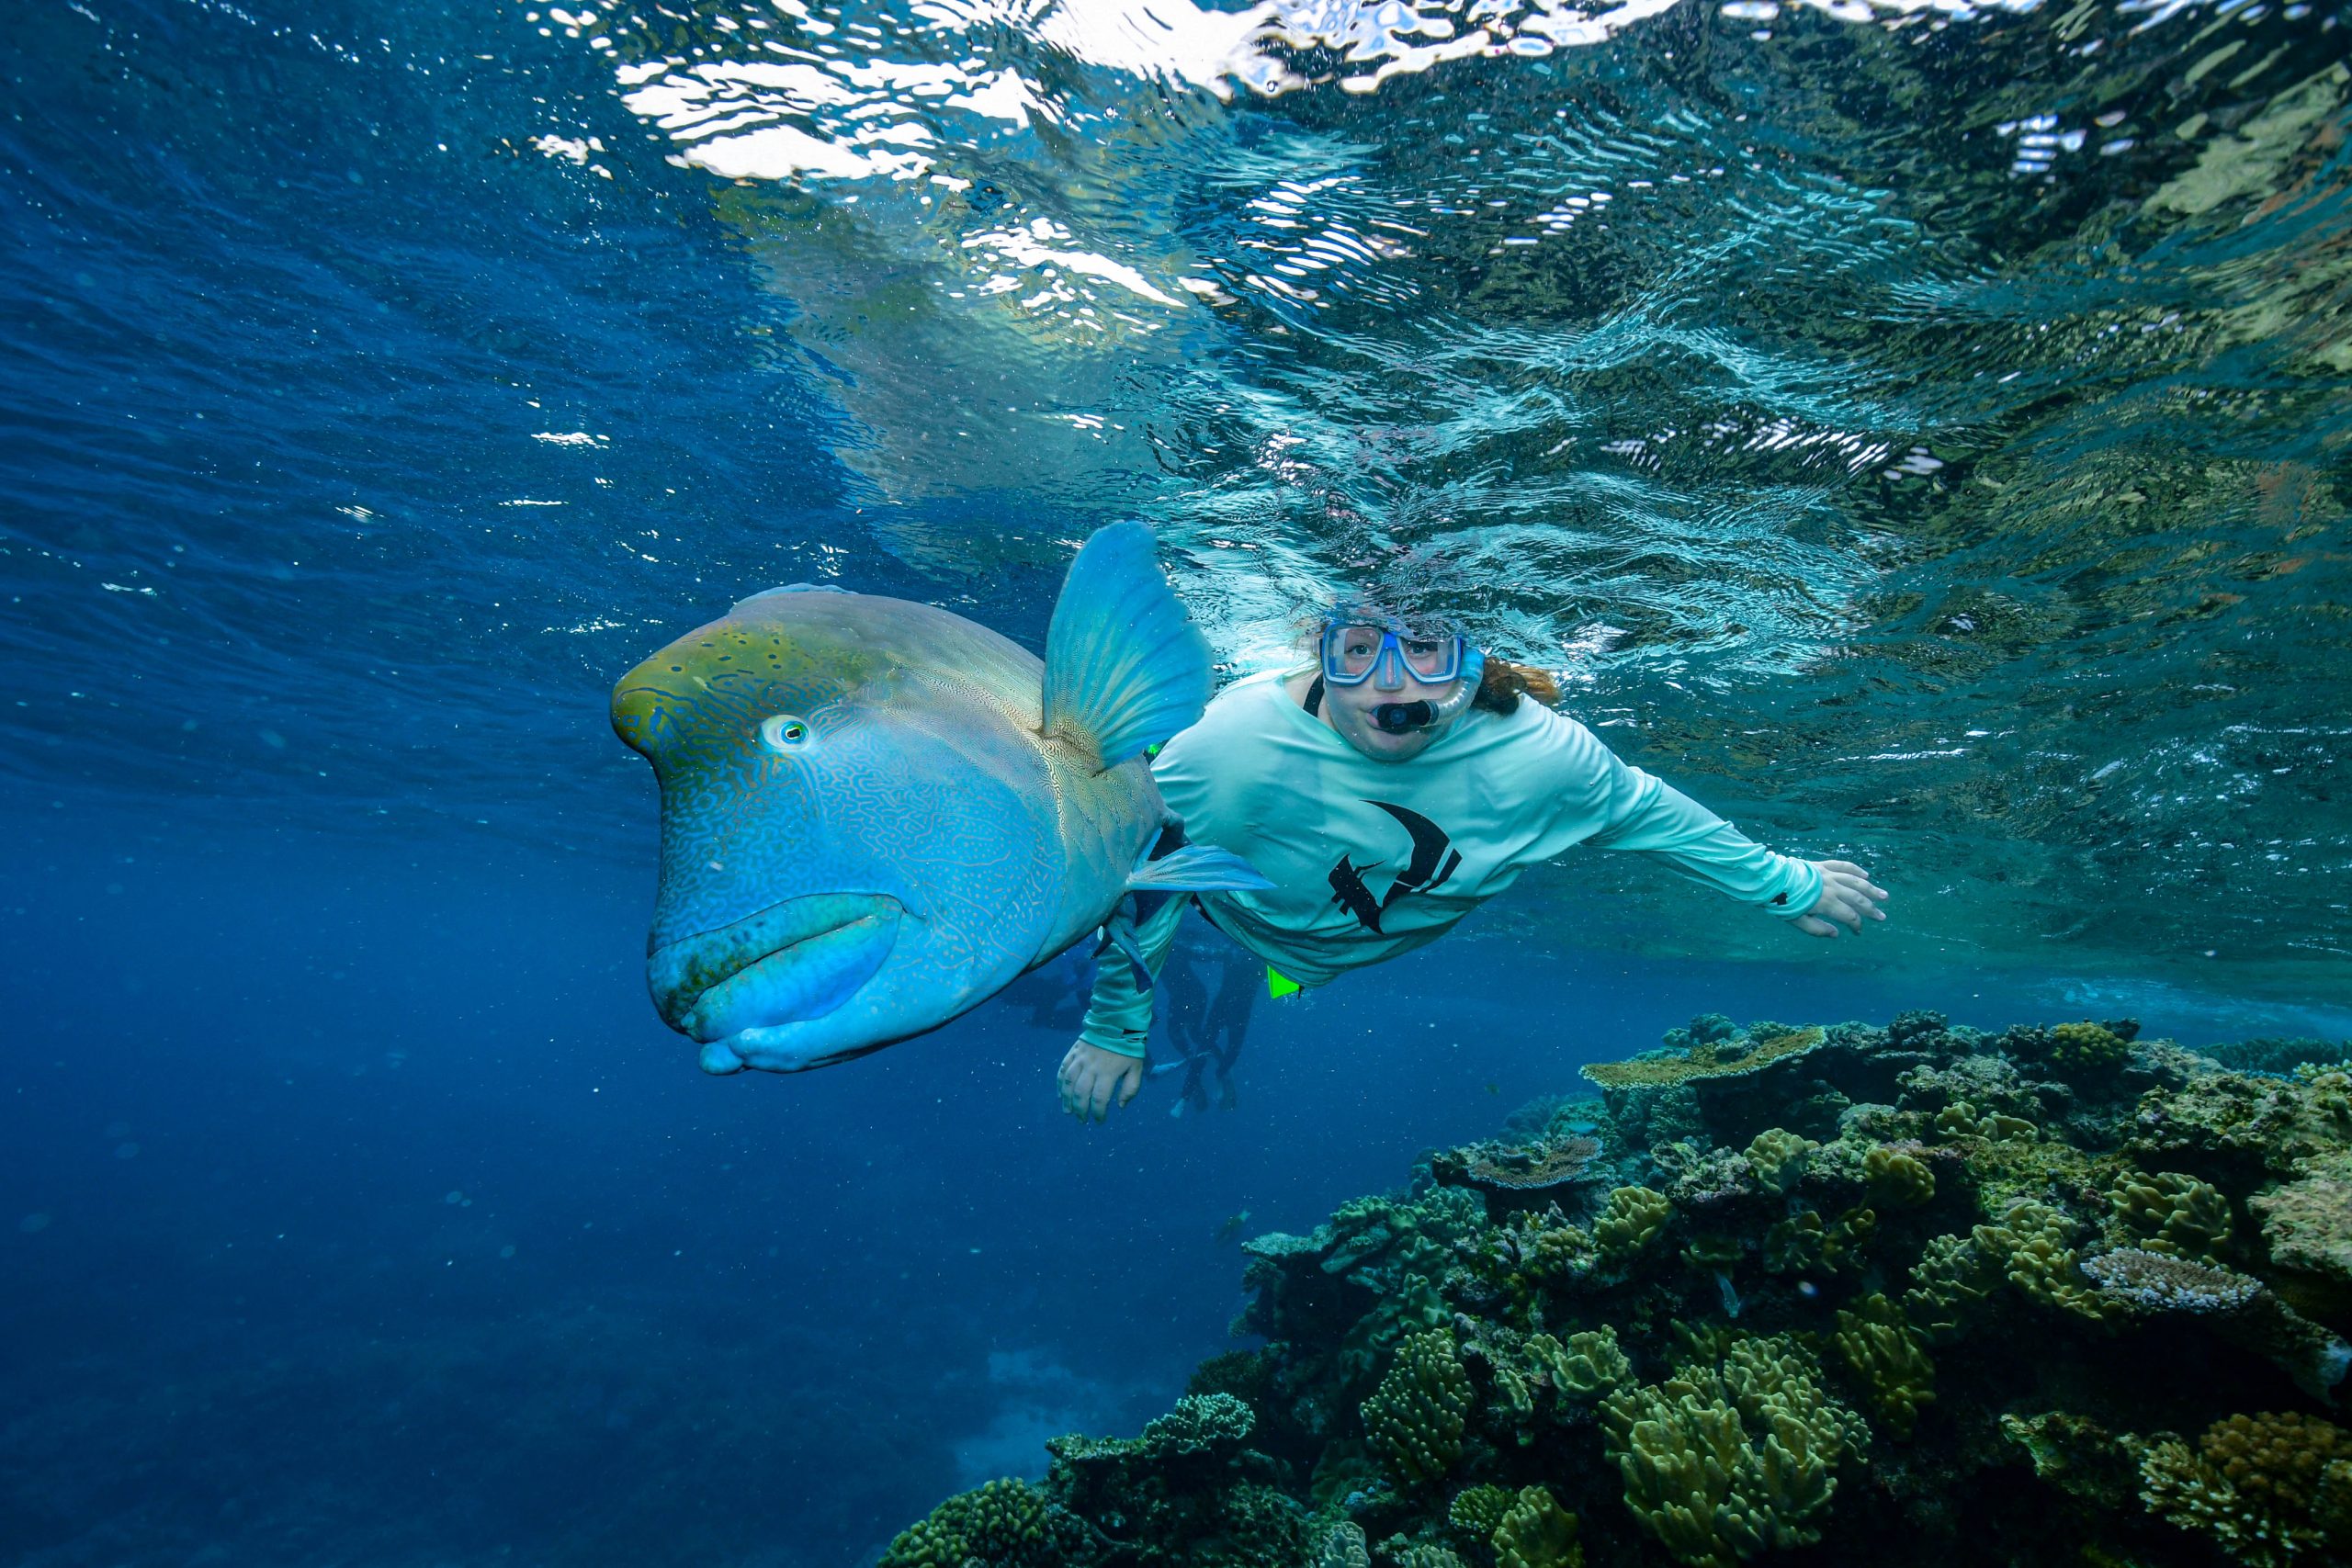 Kelsey Miller snorkels along the Great Barrier Reef with Wally the Humphead Māori Wrasse.